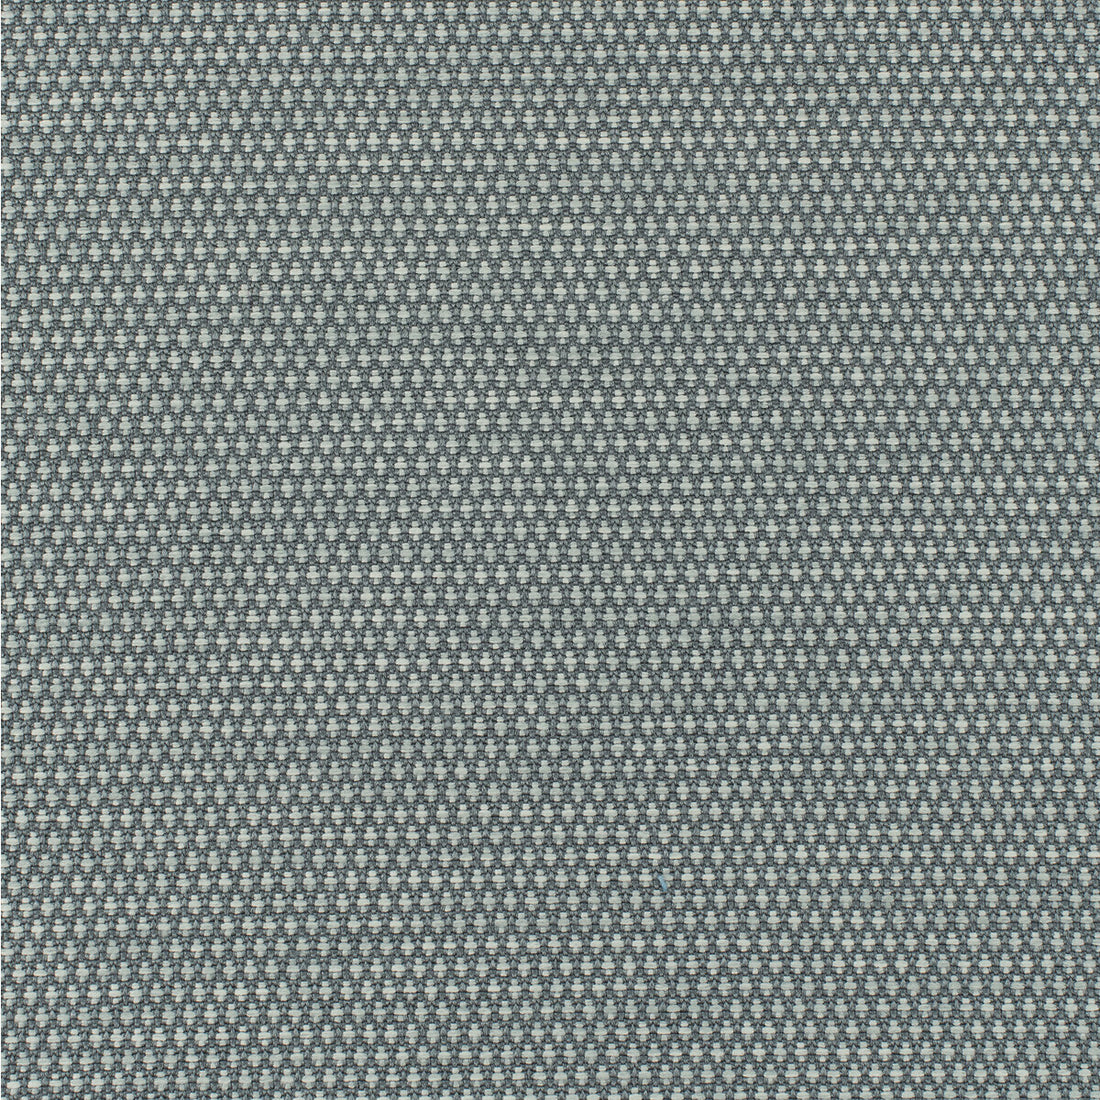 Mobilize fabric in glacier color - pattern 36256.1121.0 - by Kravet Contract in the Supreen collection